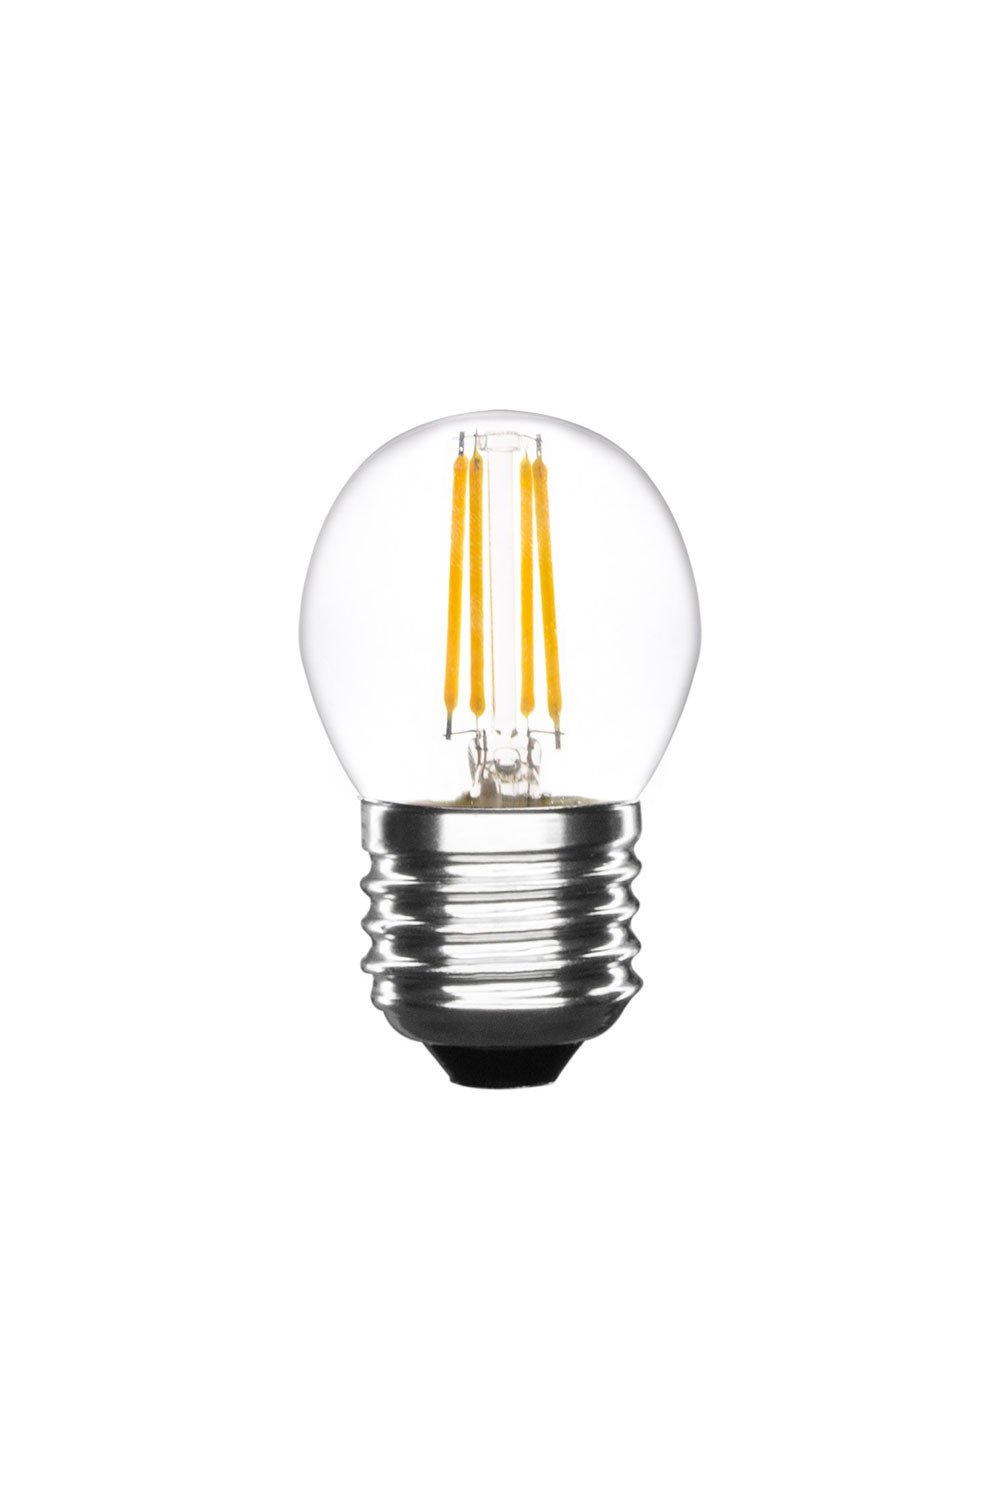 Vintage Dimmable LED Bulb E27 Class, gallery image 1